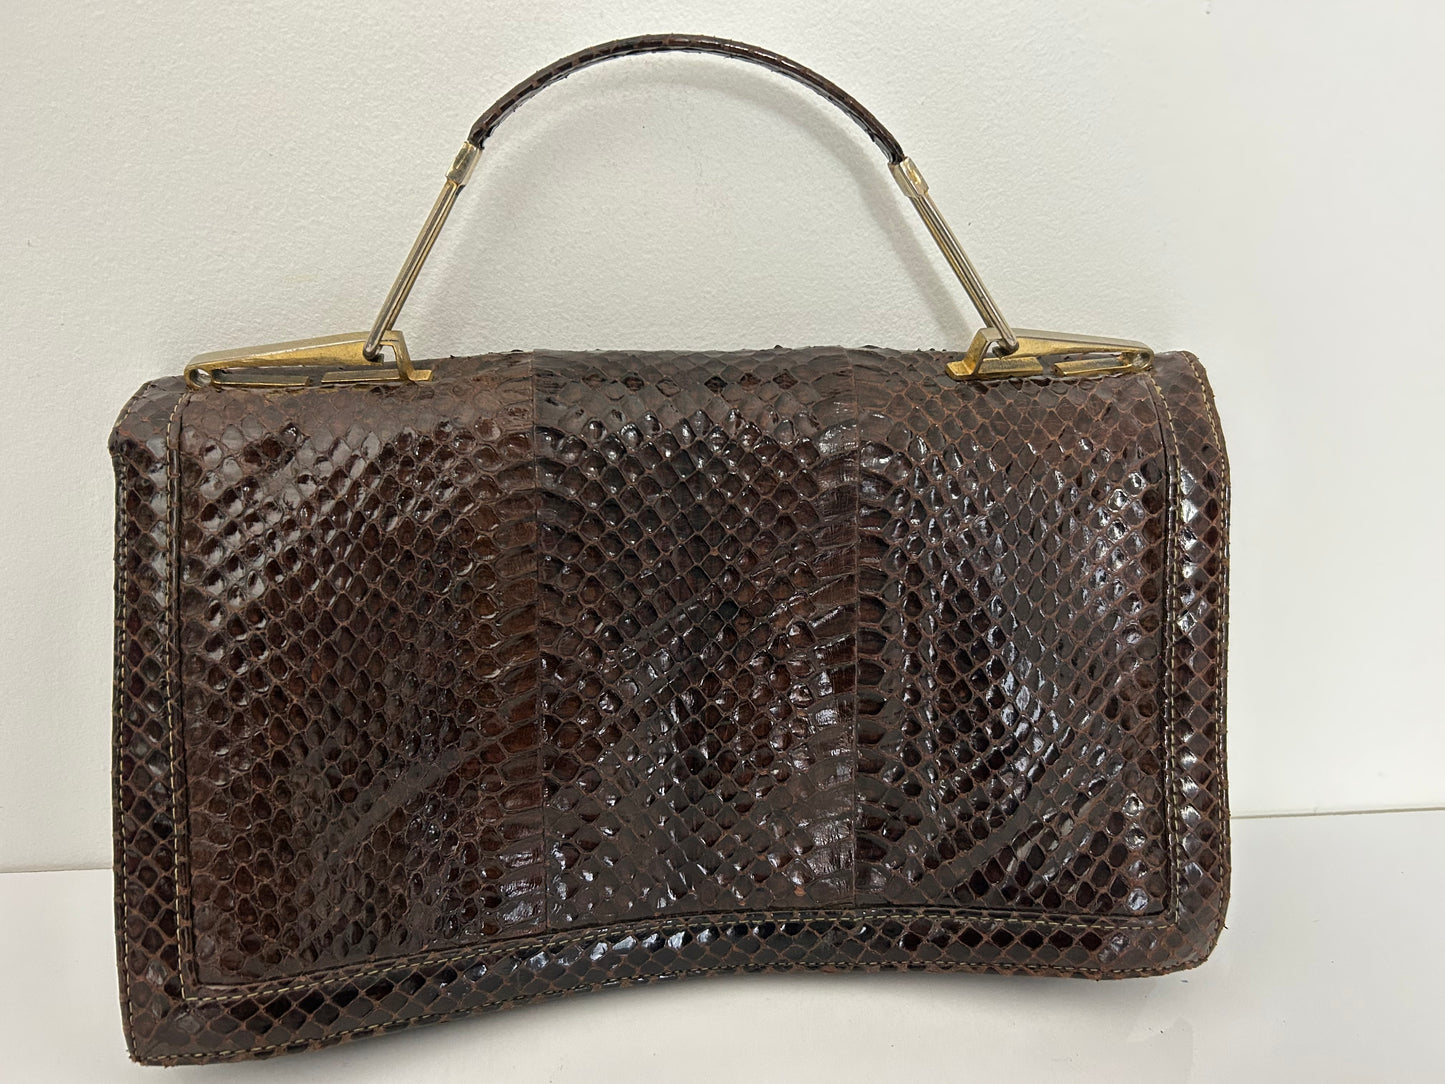 Vintage 1970s Italian Brown Reptile Leather Handbag With Removable Shoulder Strap